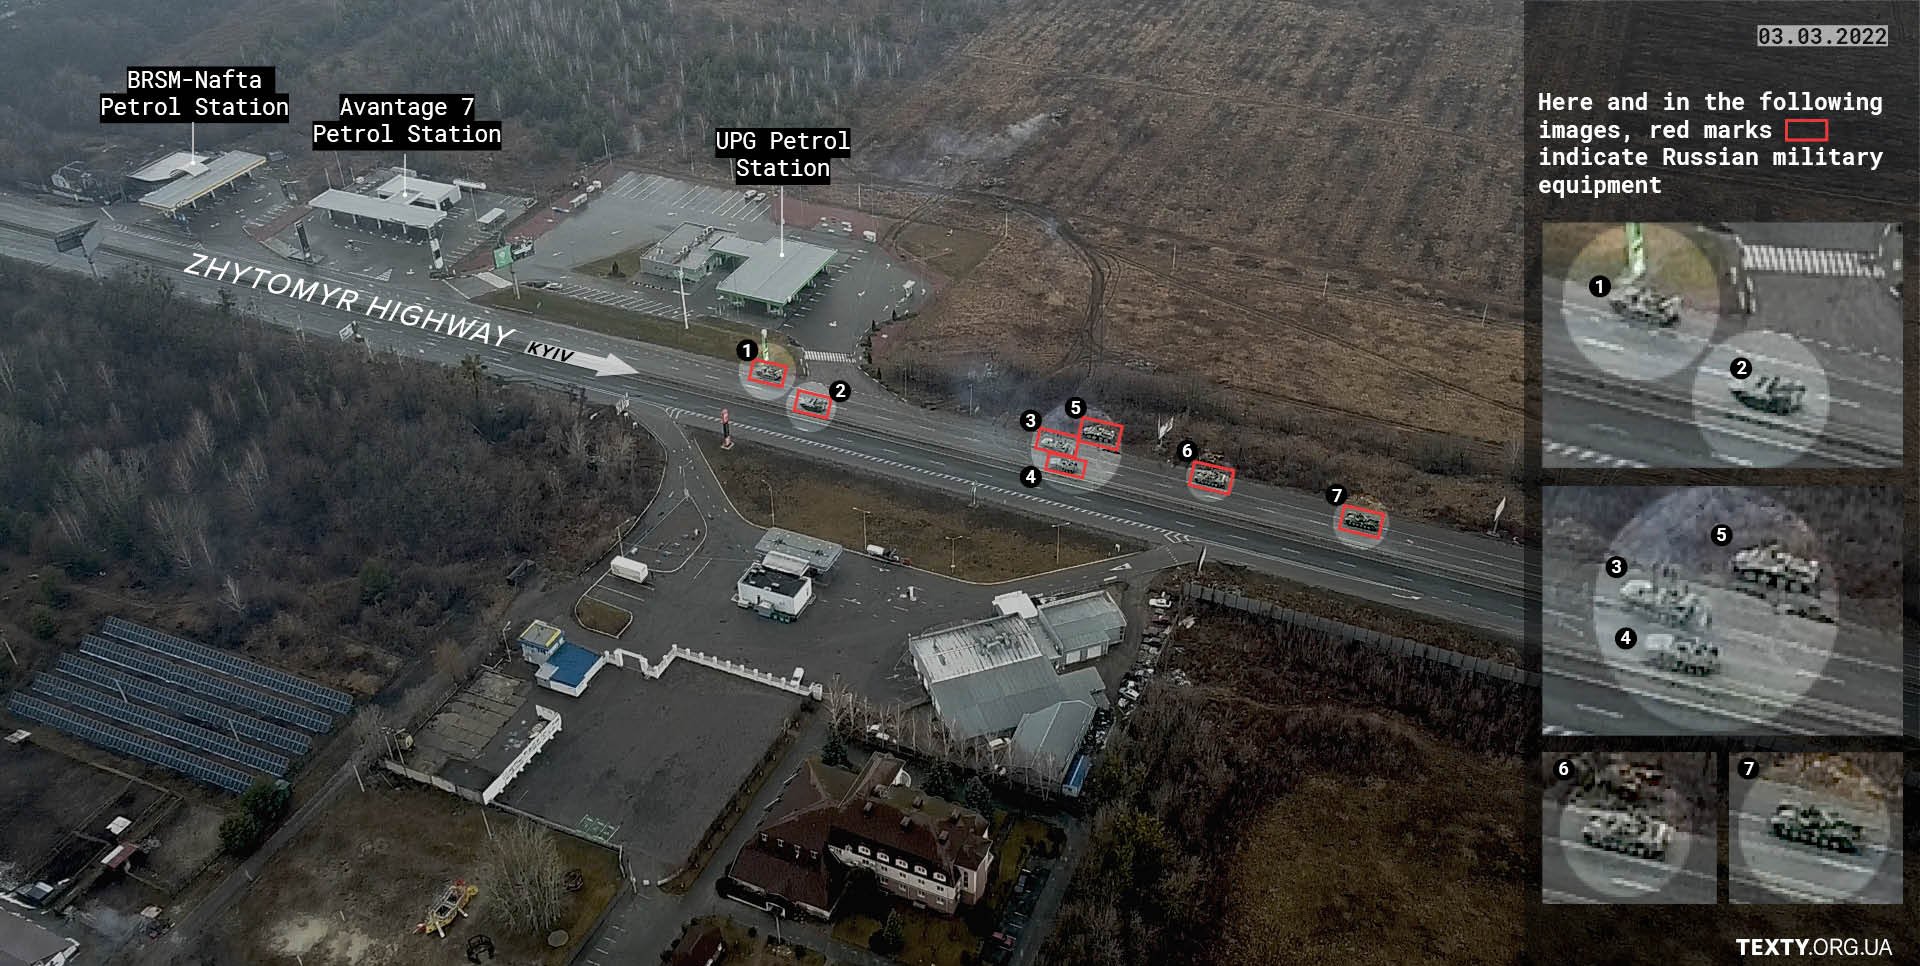 Russians deploy equipment and personnel along Zhytomyr highway between Myla and Mriya villages